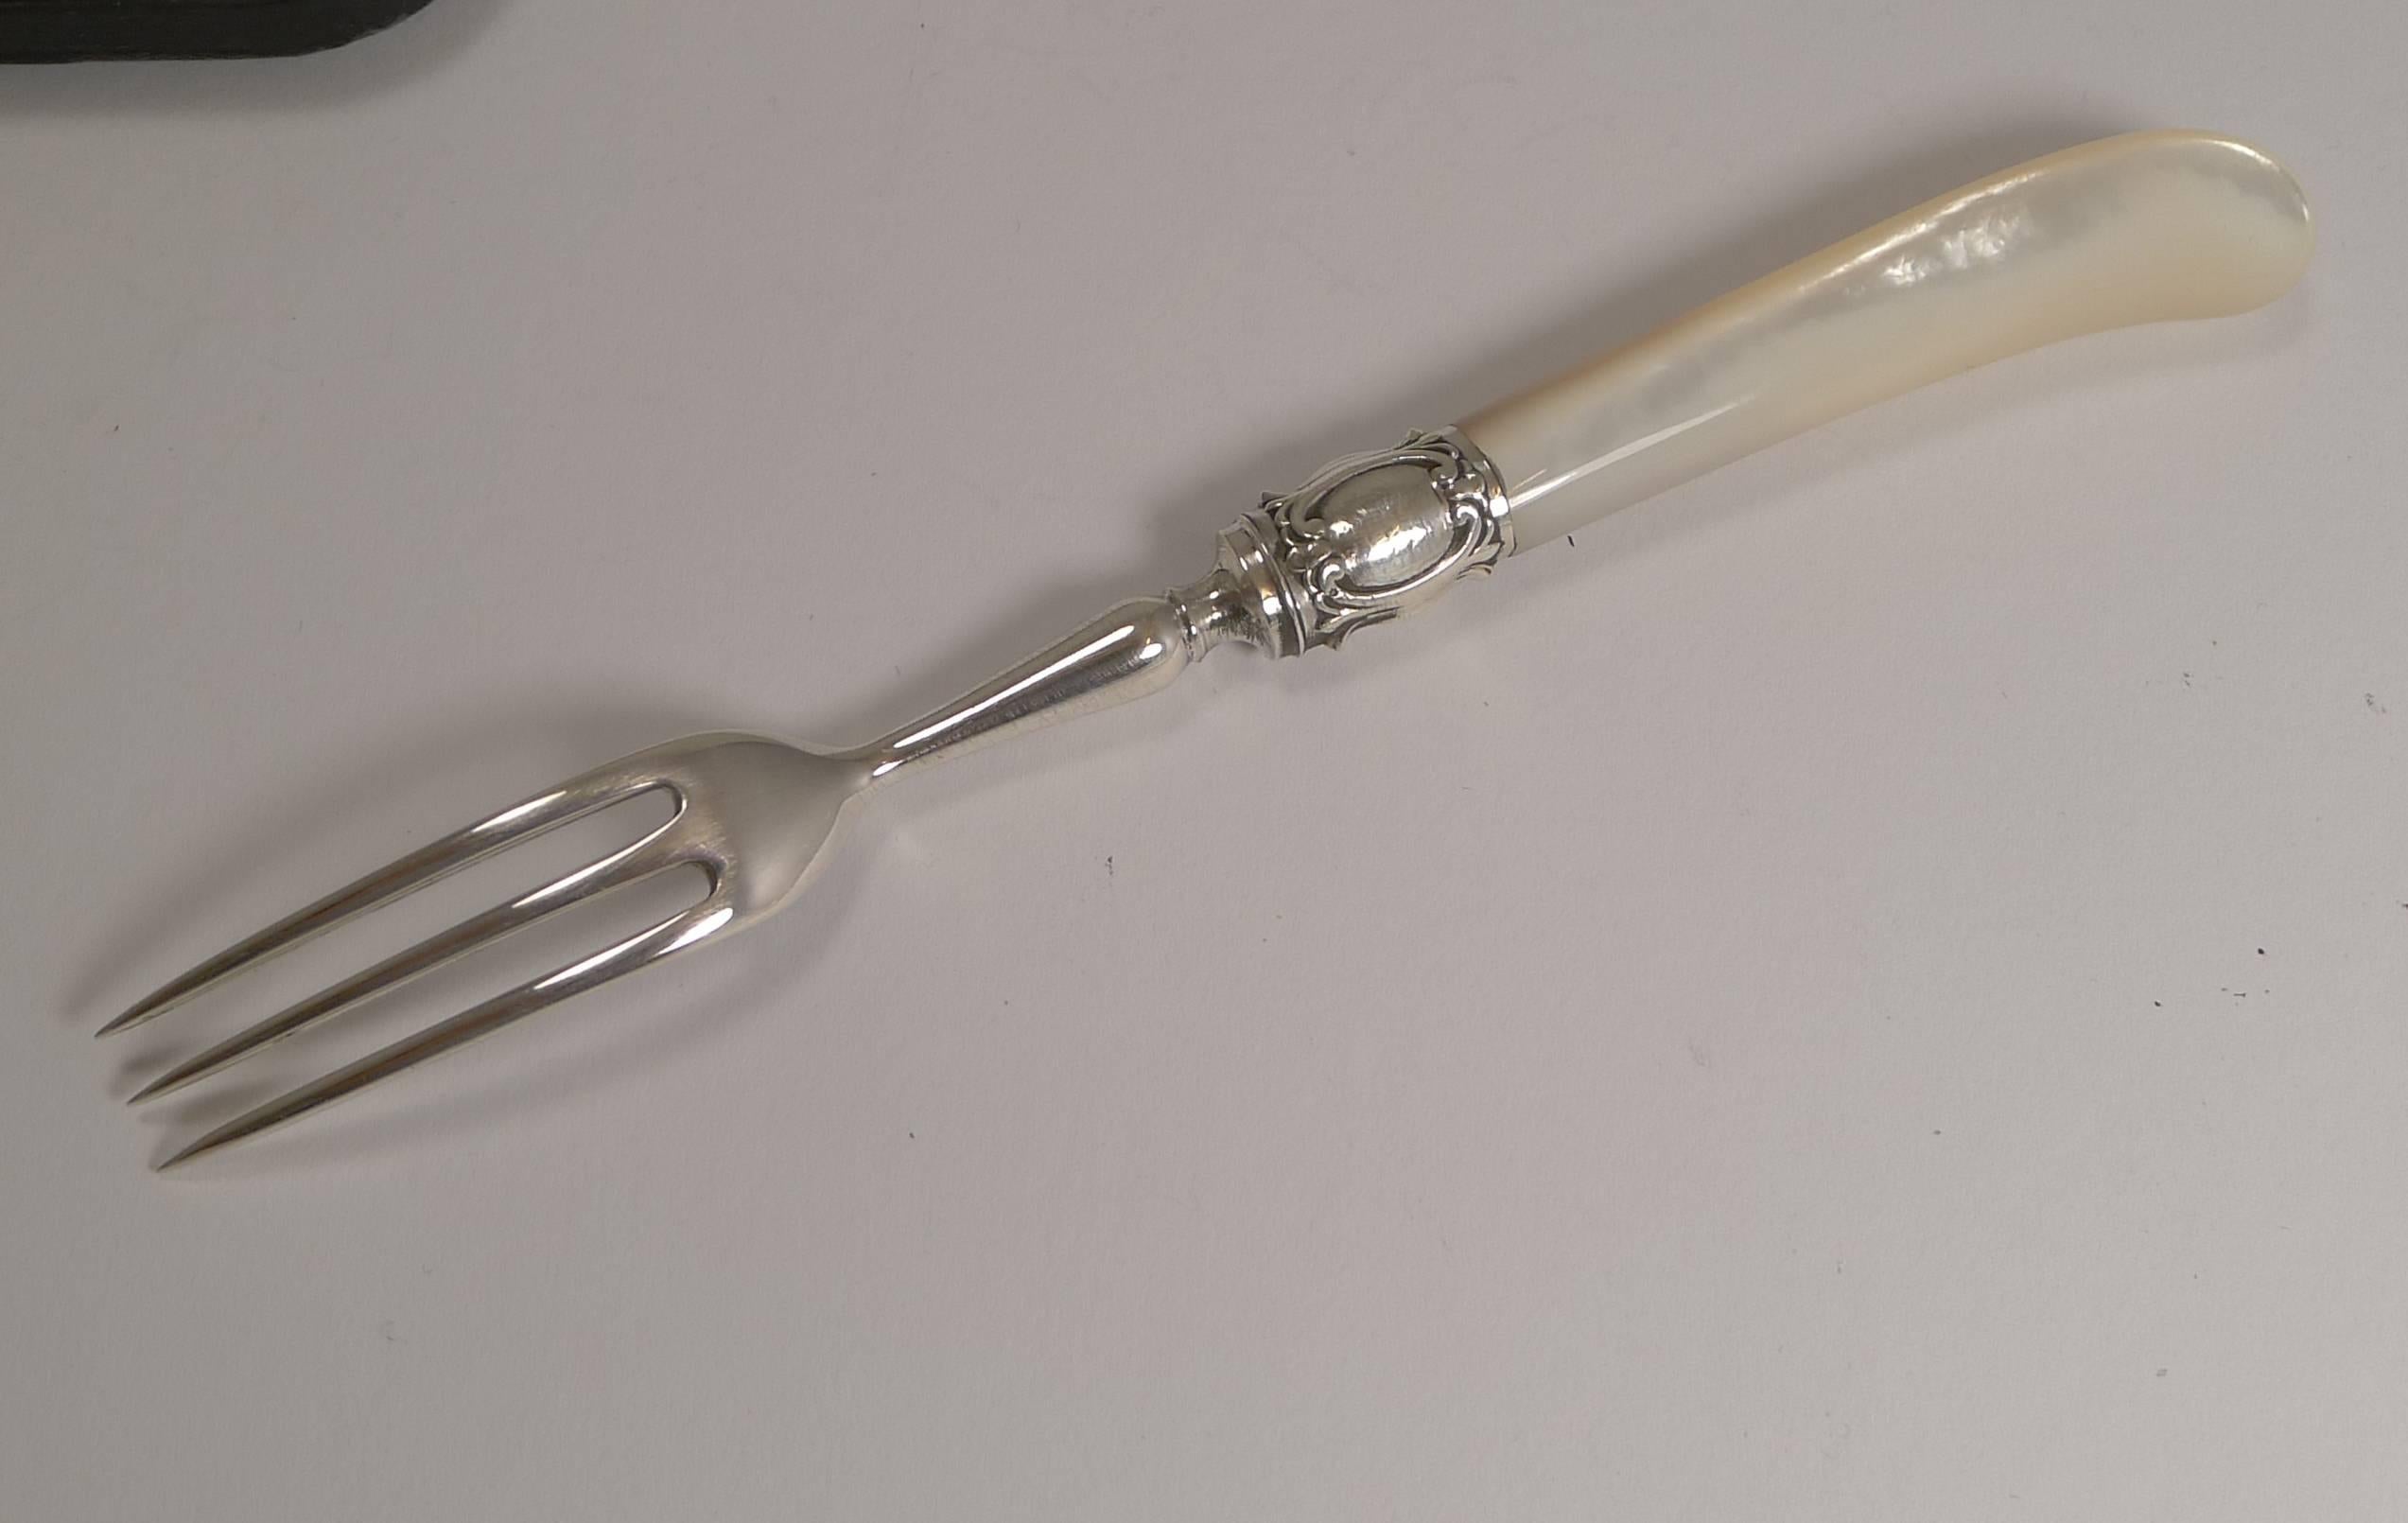 Late Victorian Antique English Sterling Silver and Mother-of-Pearl Cake or Desert Forks, 1900